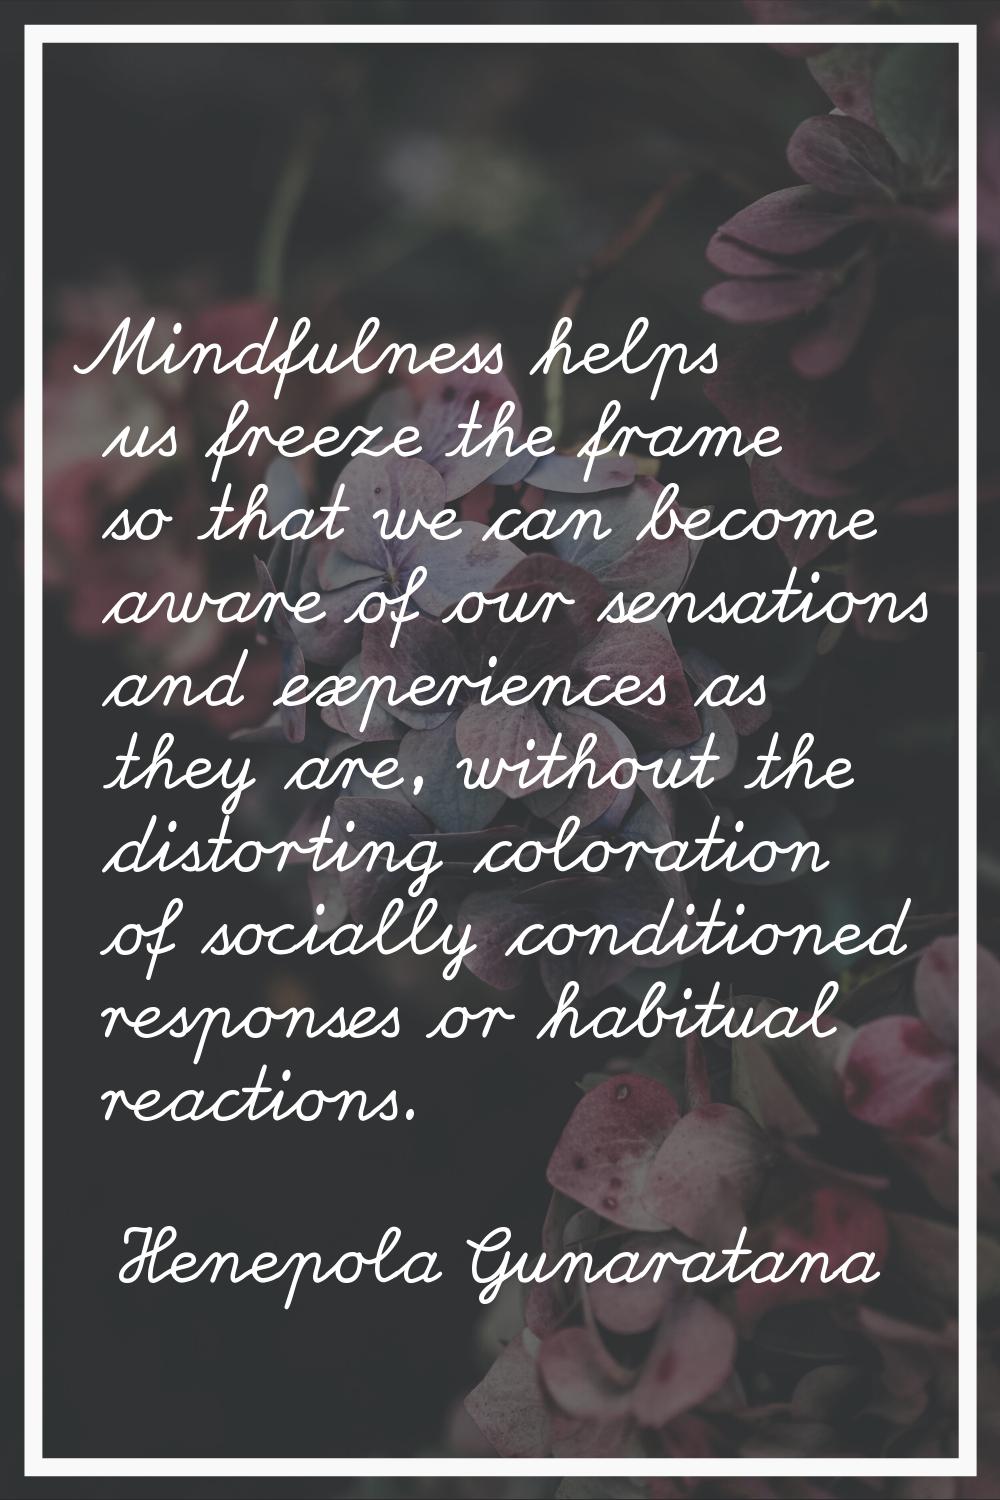 Mindfulness helps us freeze the frame so that we can become aware of our sensations and experiences